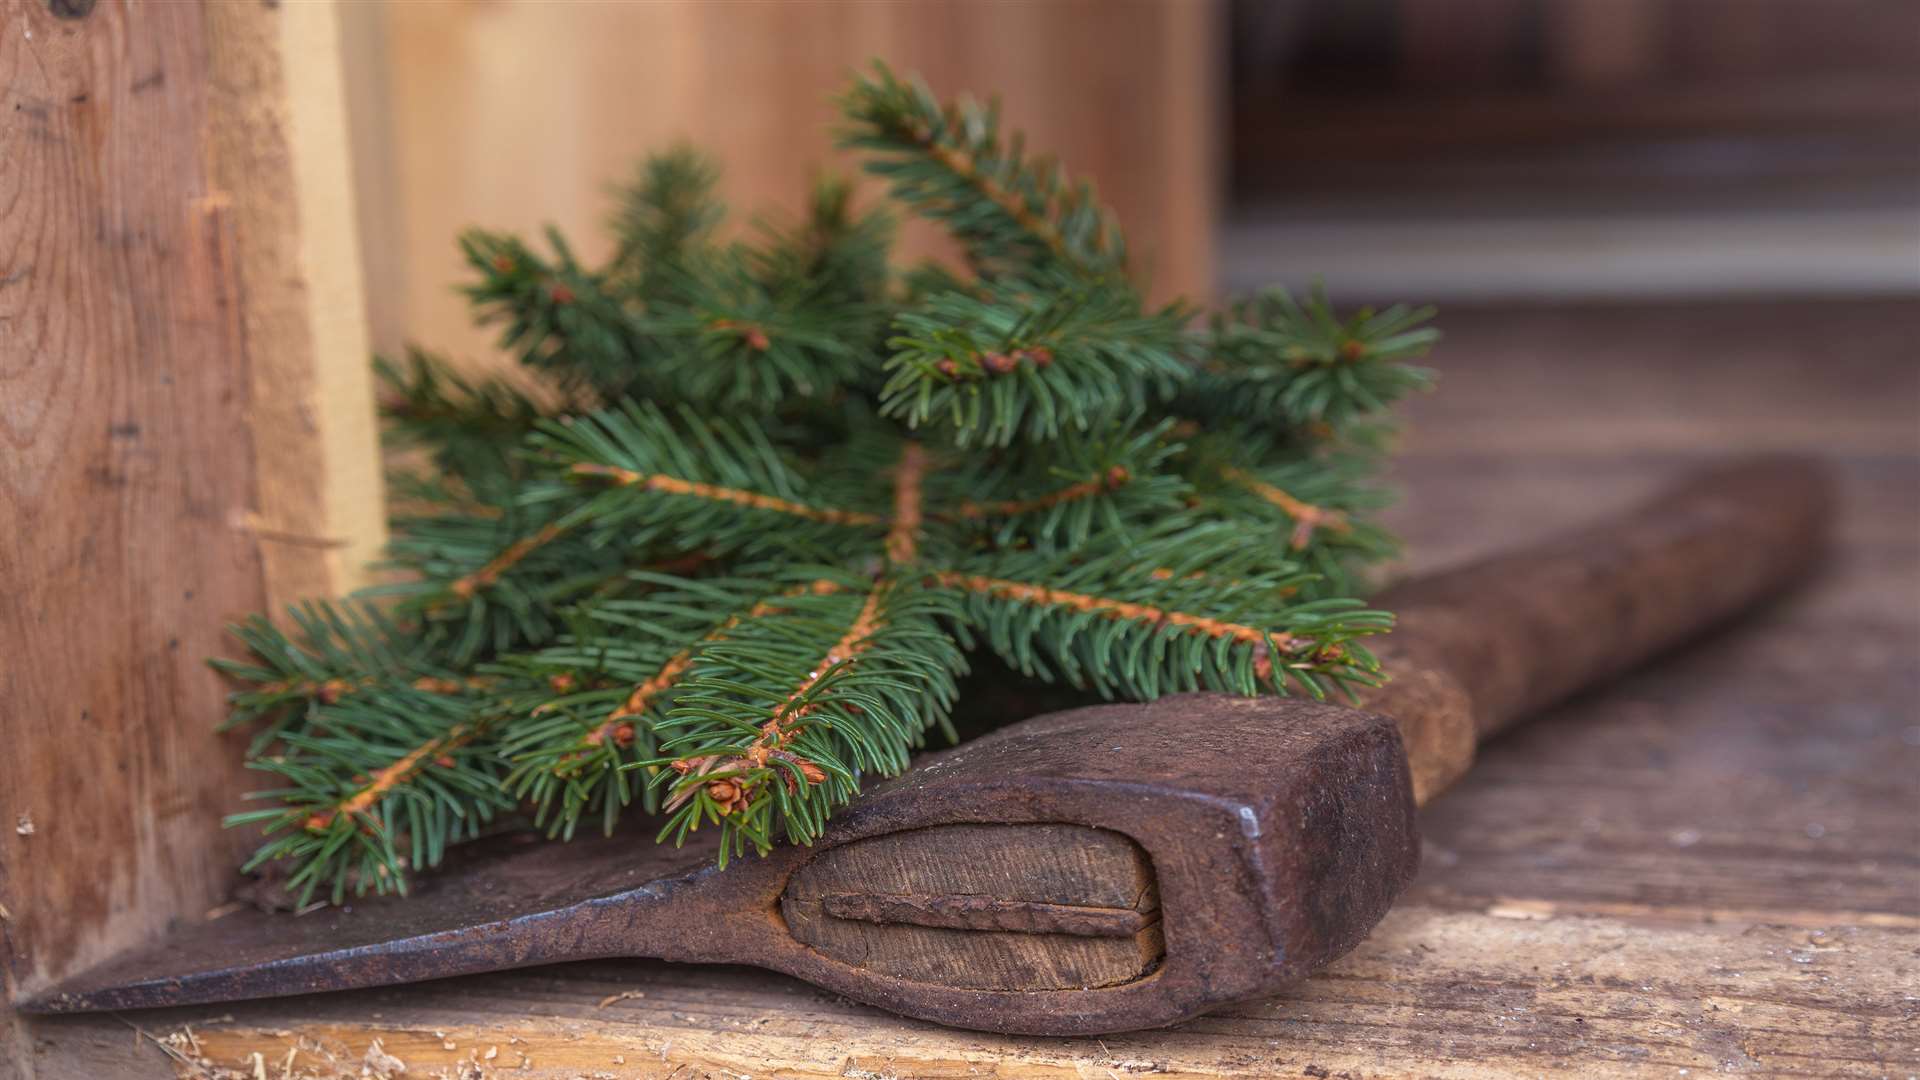 Cut down the tree into smaller, more manageable pieces